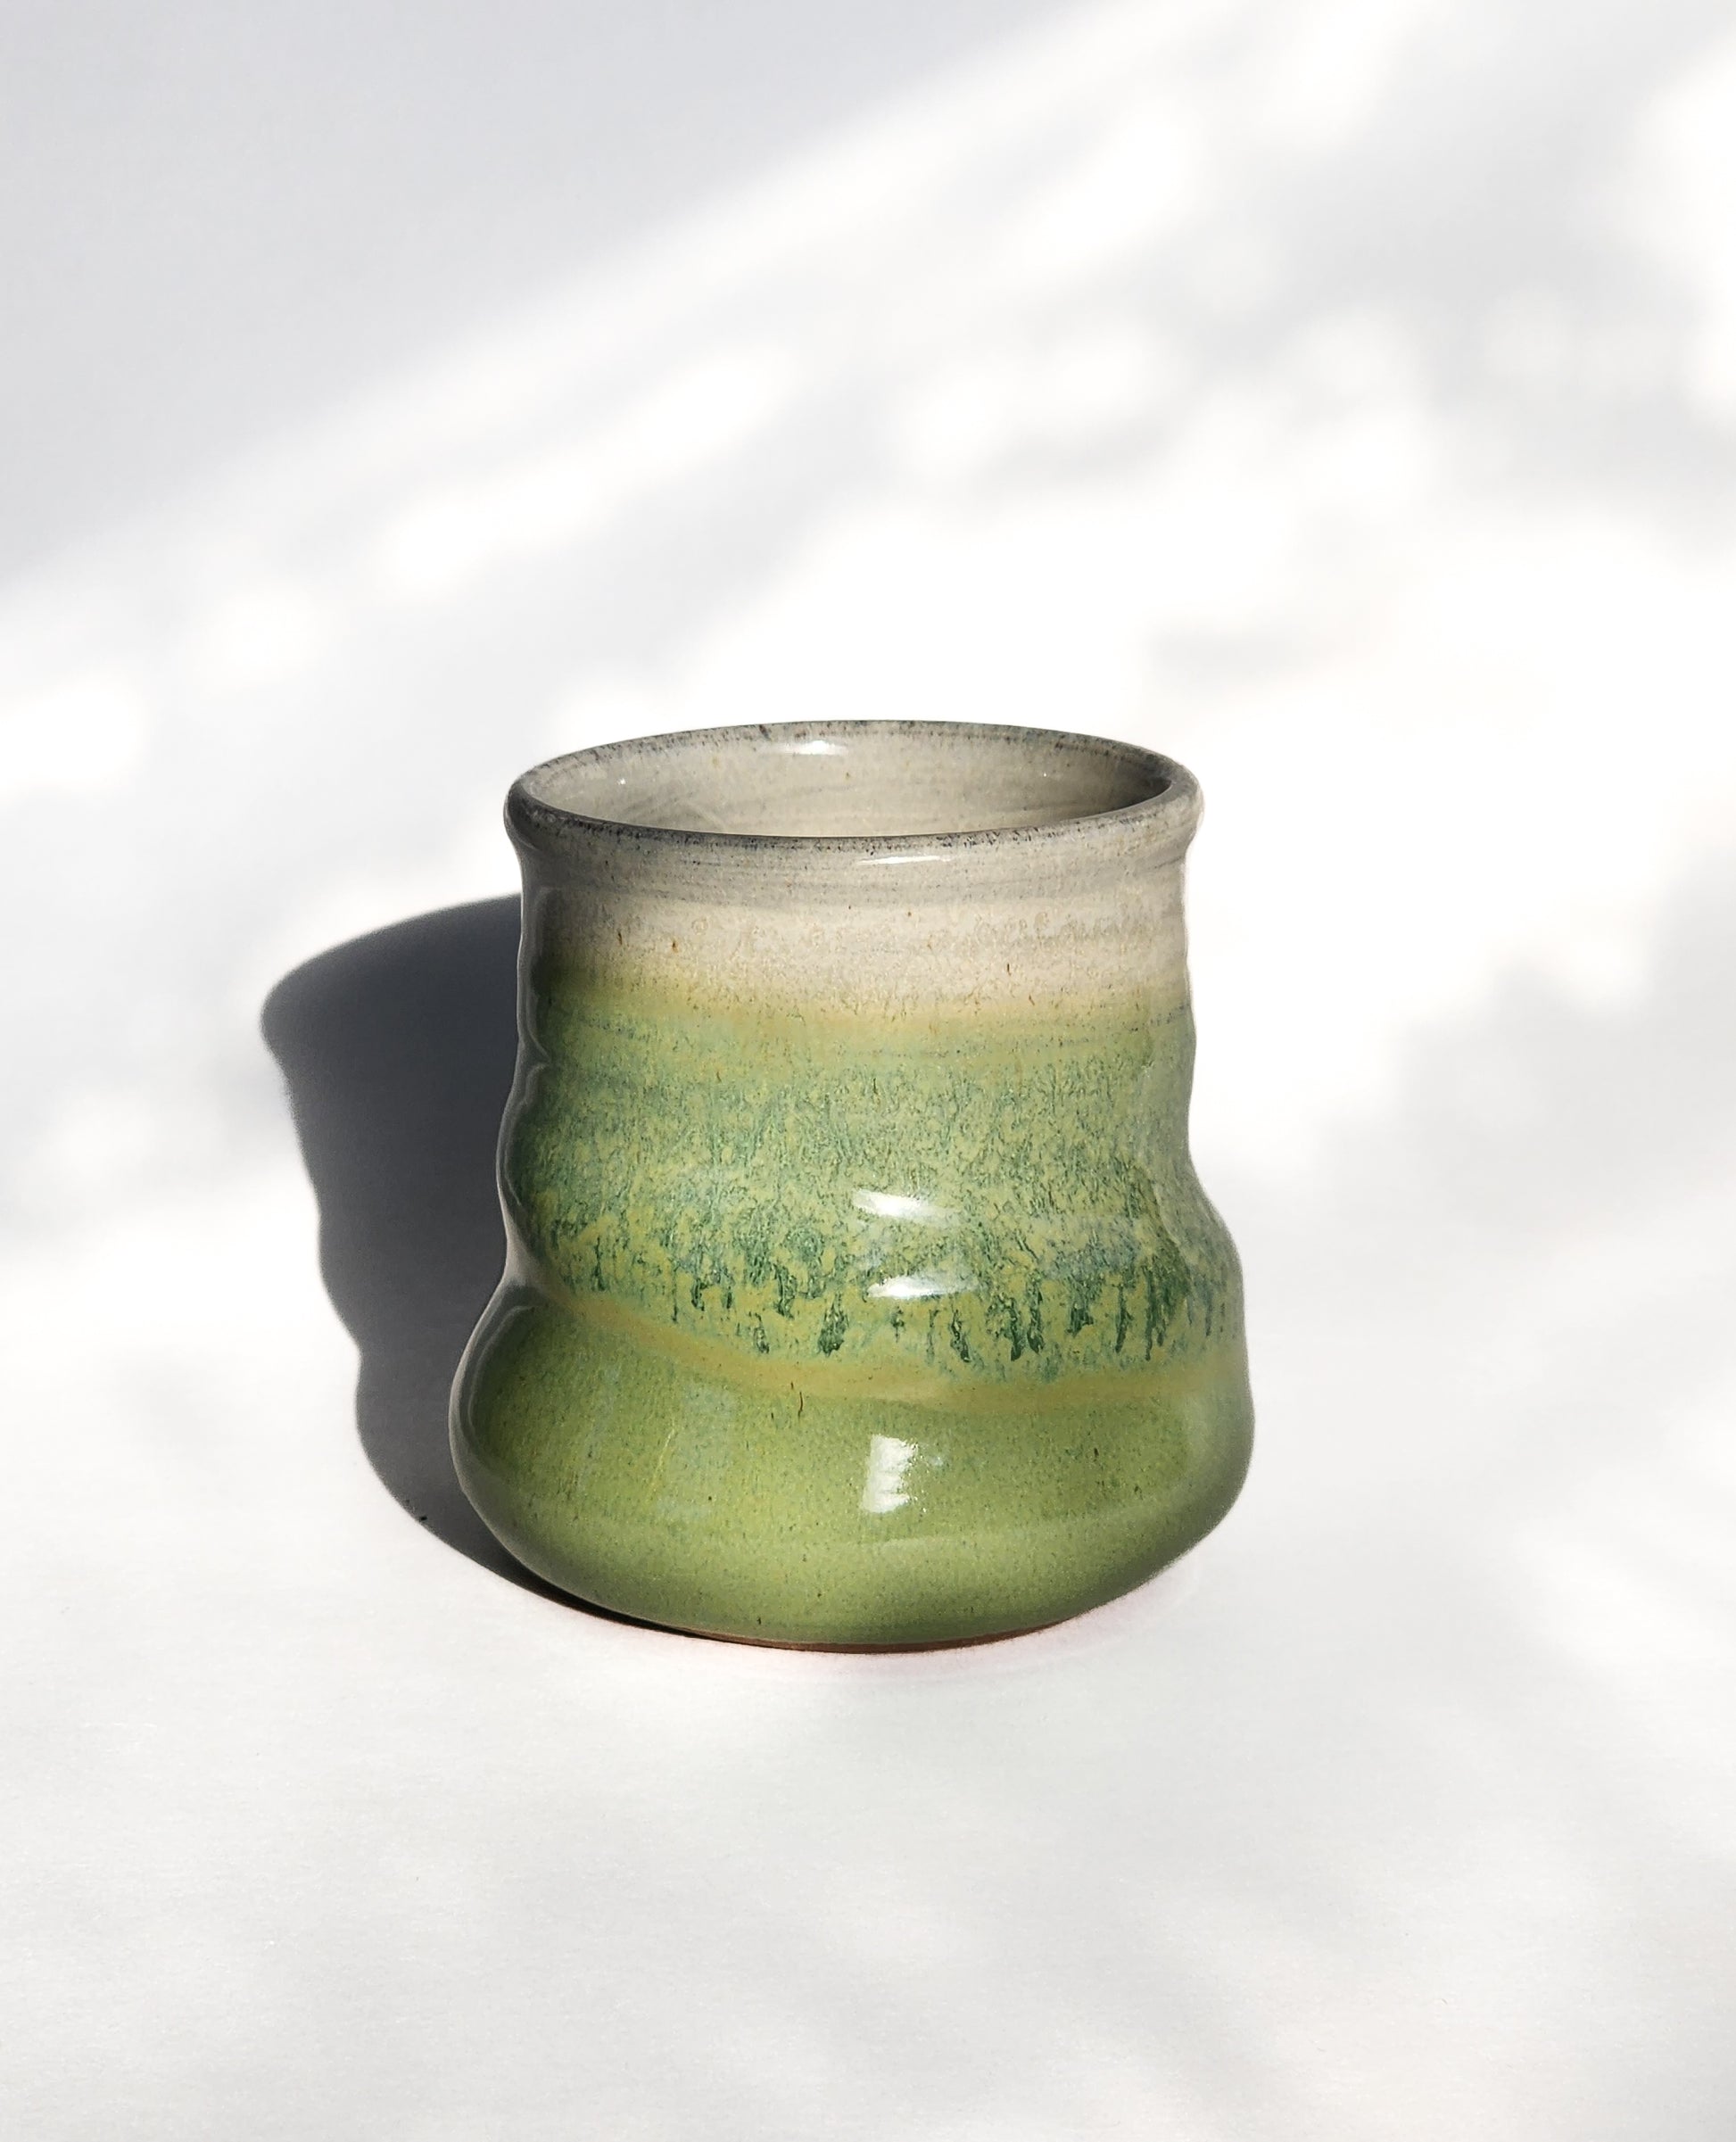 Image: Clinton Pottery's Small Tumbler in Bud Green – An 8 oz visually appealing and functional addition to your collection. This machine washable tumbler, crafted with care, features a cool, curvy design for a comfortable grip and contemporary elegance. The refreshing Bud Green color adds a touch of nature's vitality, reminiscent of spring foliage and new beginnings.